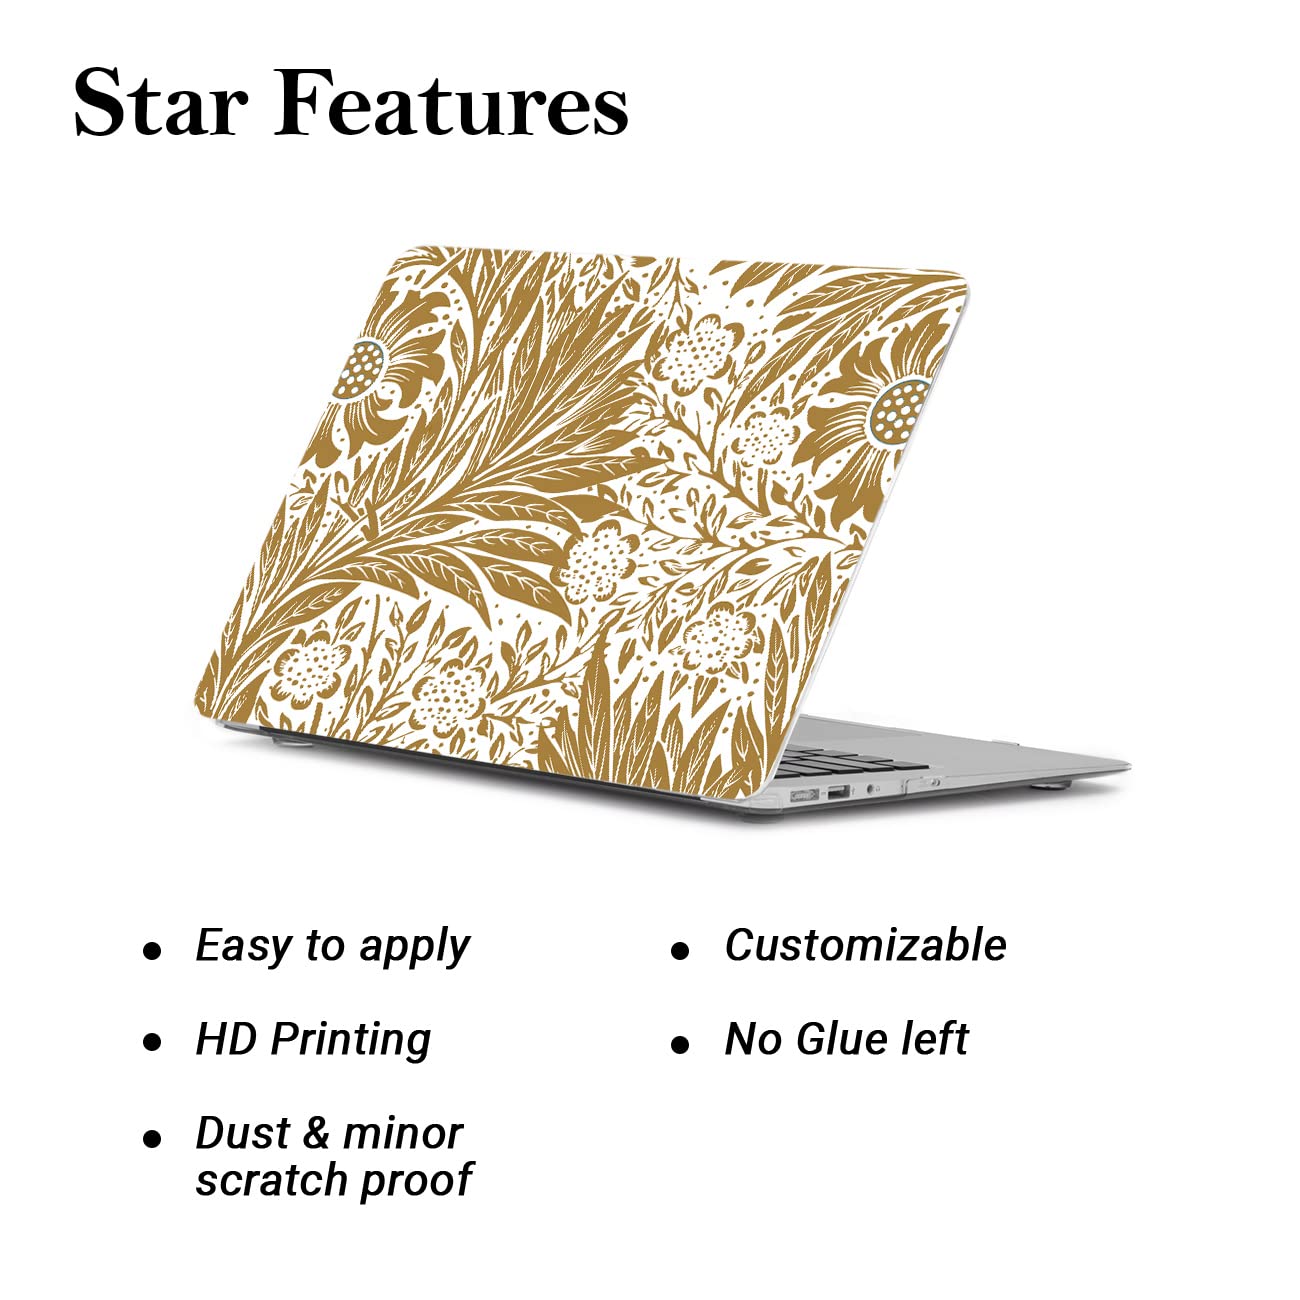 Kotart Laptop Decals for All Laptops Upto 15.6 inch - Self Adhesive Leaf Printed Vinyl Laptop Skins / Stickers for HP Apple Acer Asus Dell LG and All Laptops-Kotart